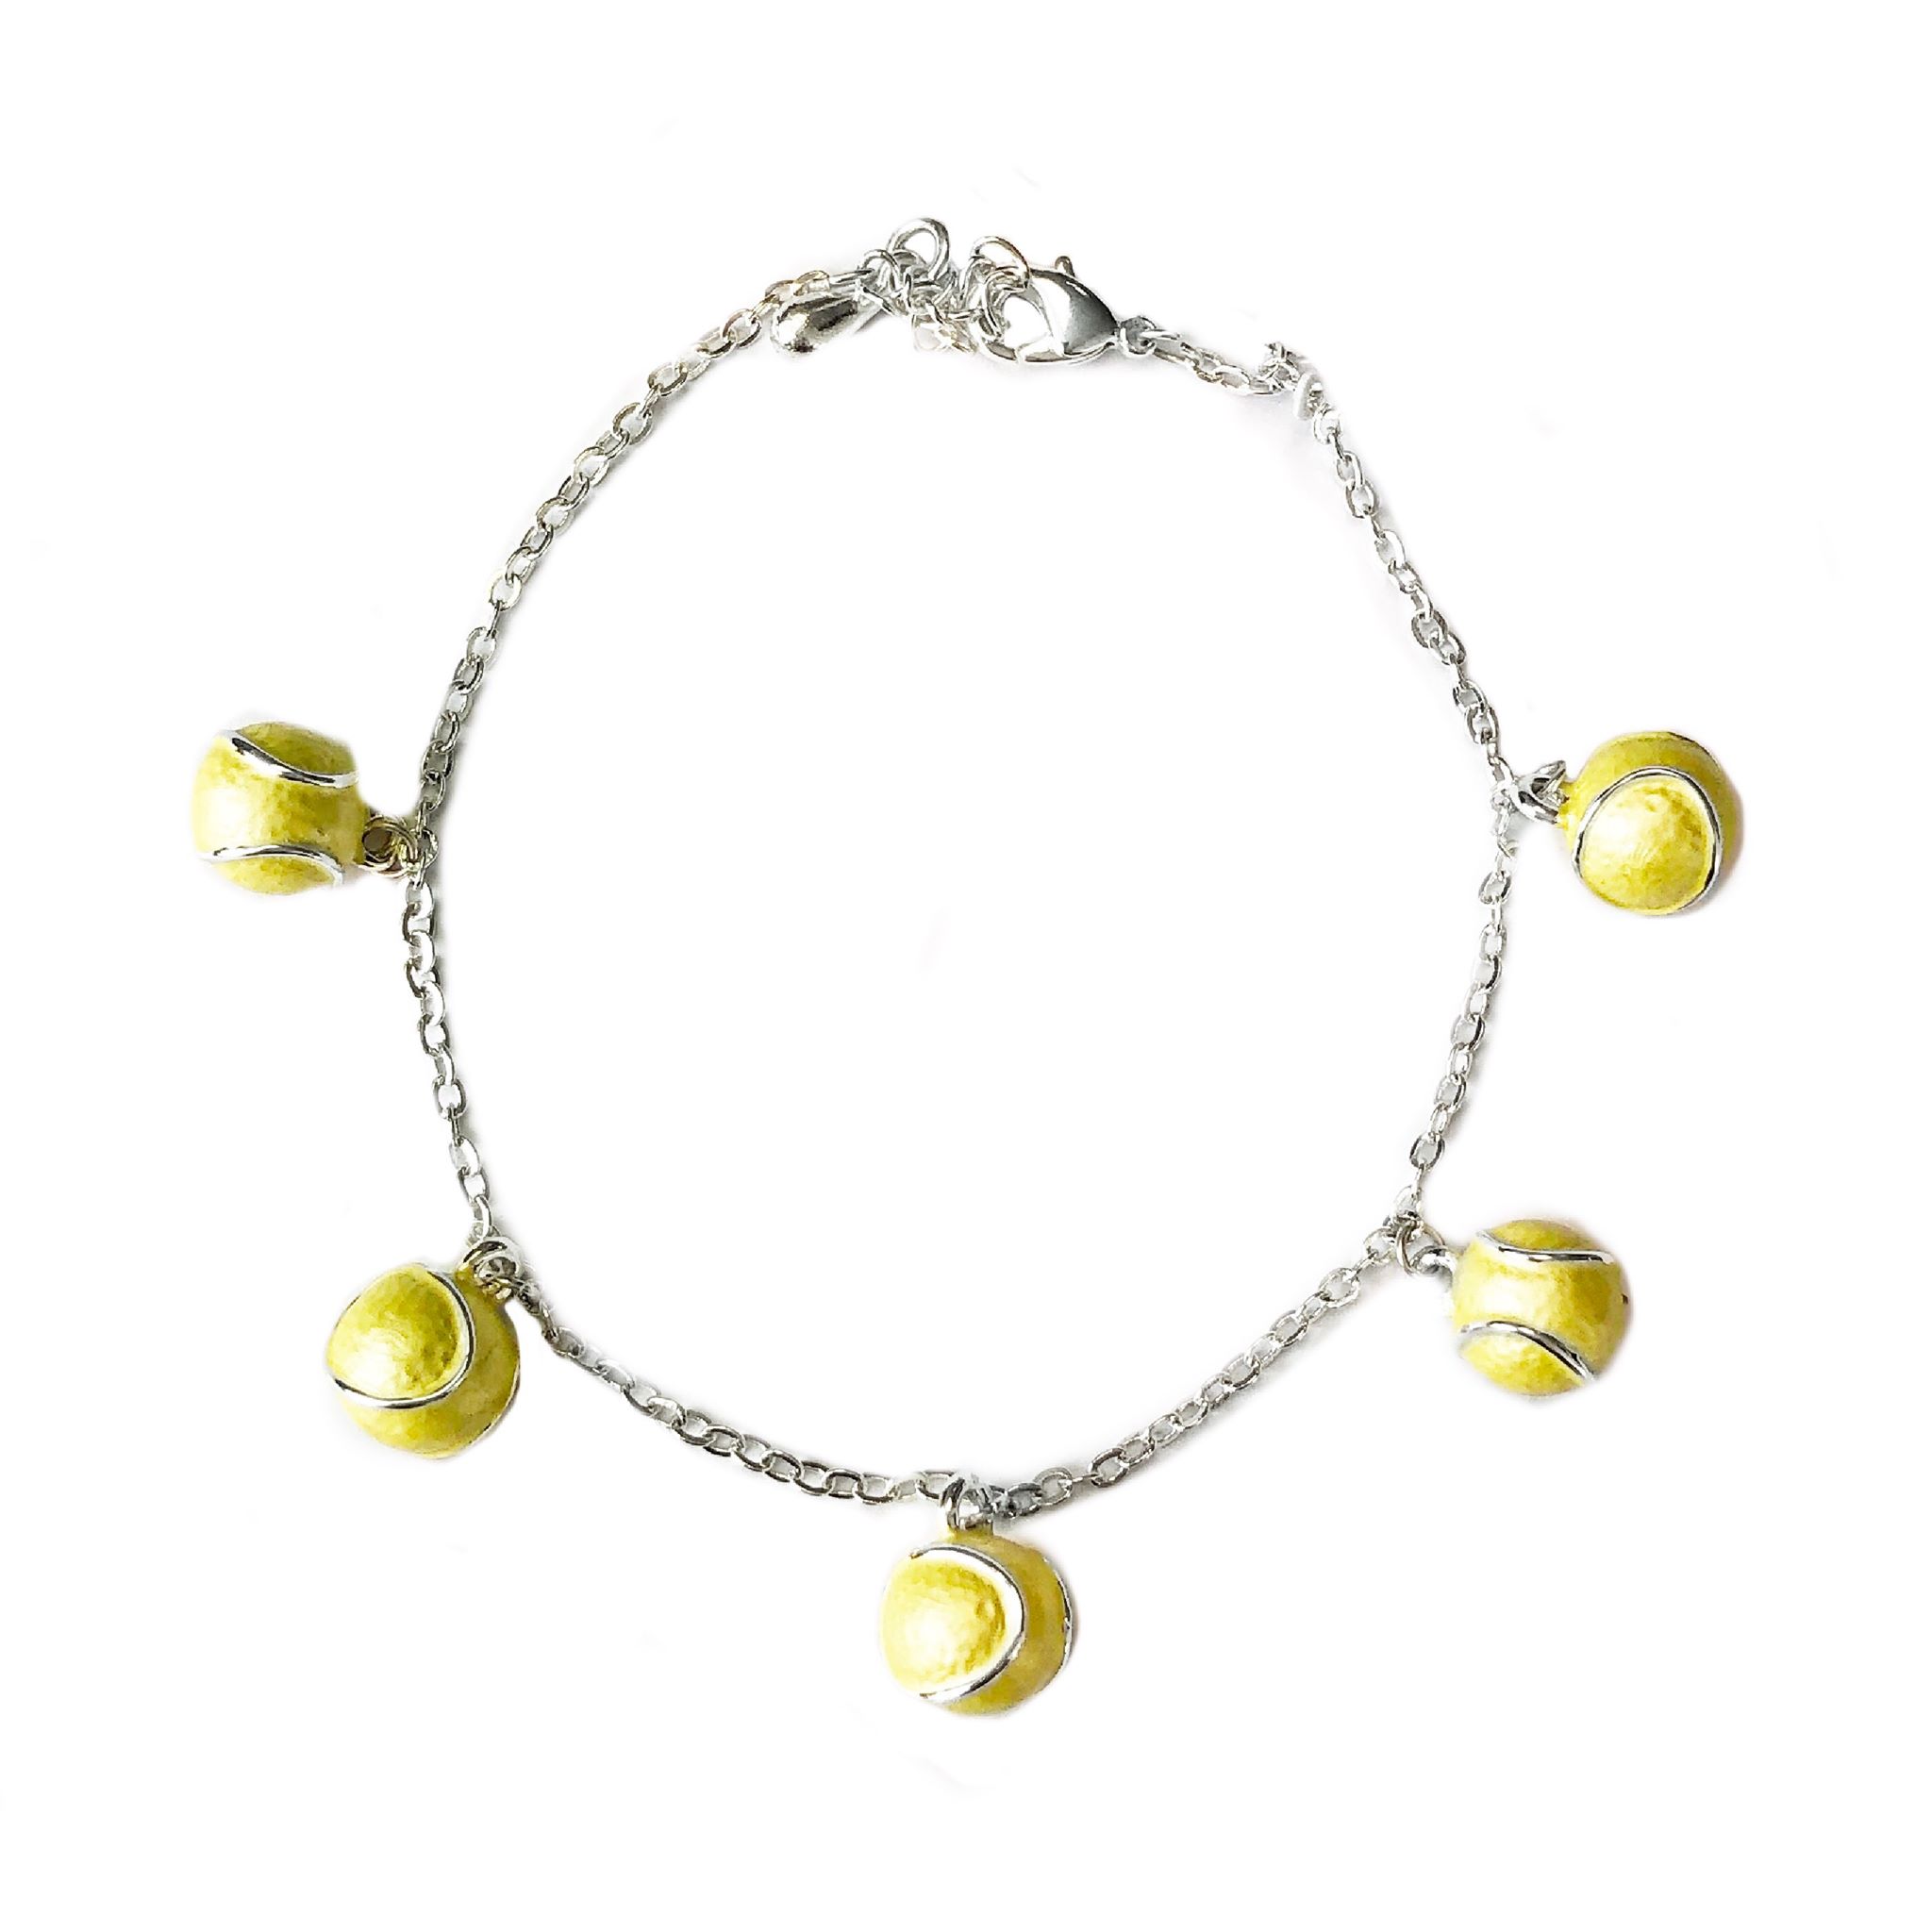 Boodles - A Boodles tennis bracelet, pendant and earrings complete with  diamond-set tennis balls to celebrate our love of the sport and to mark the  start of 'The Boodles' tennis 2016 at